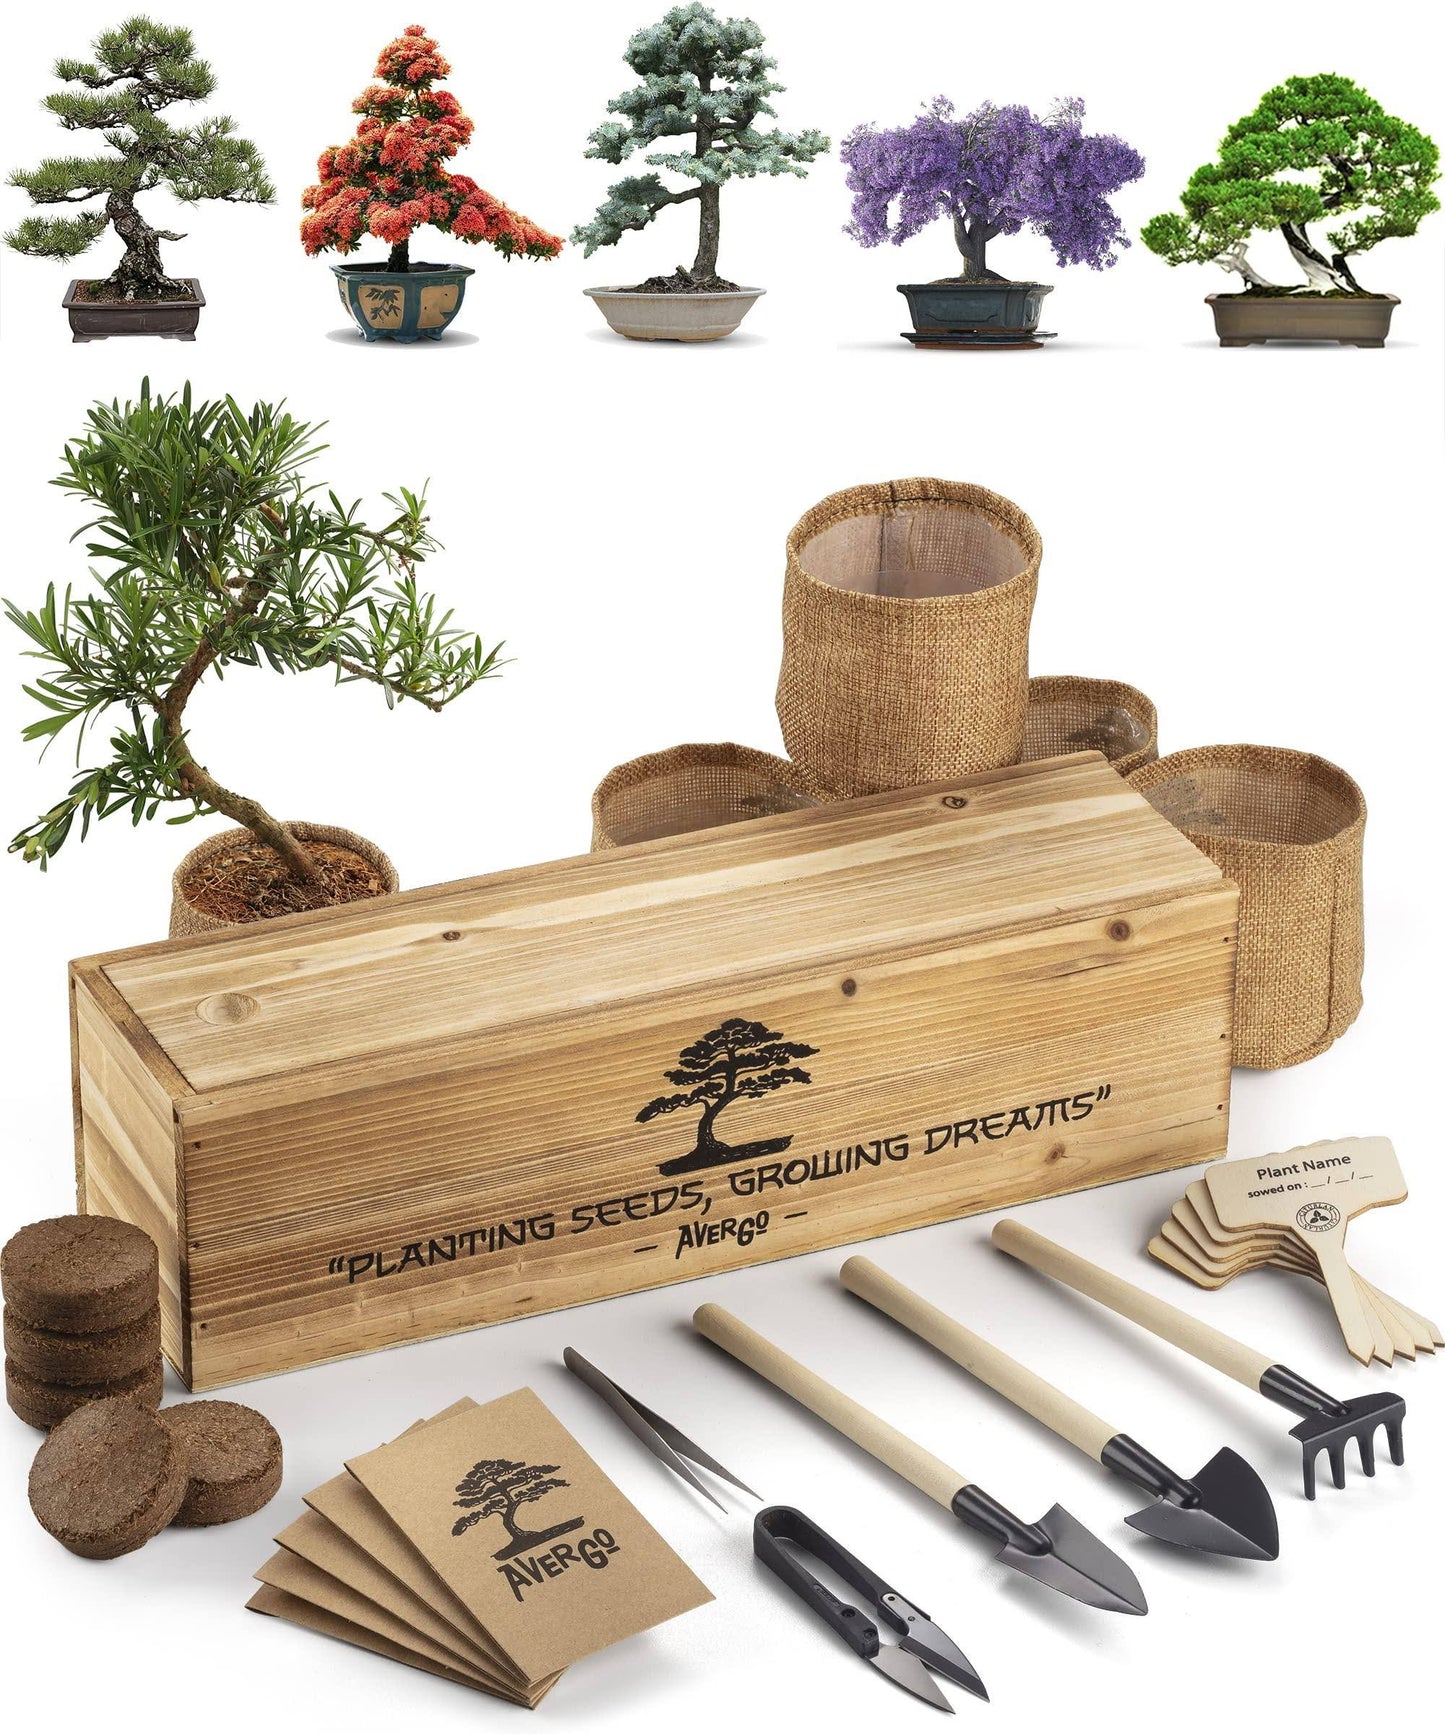 Tree Kit – 5x Unique Japanese Bonzai Trees Complete Indoor Starter Kit For Growing Plants With Bonsai Seeds